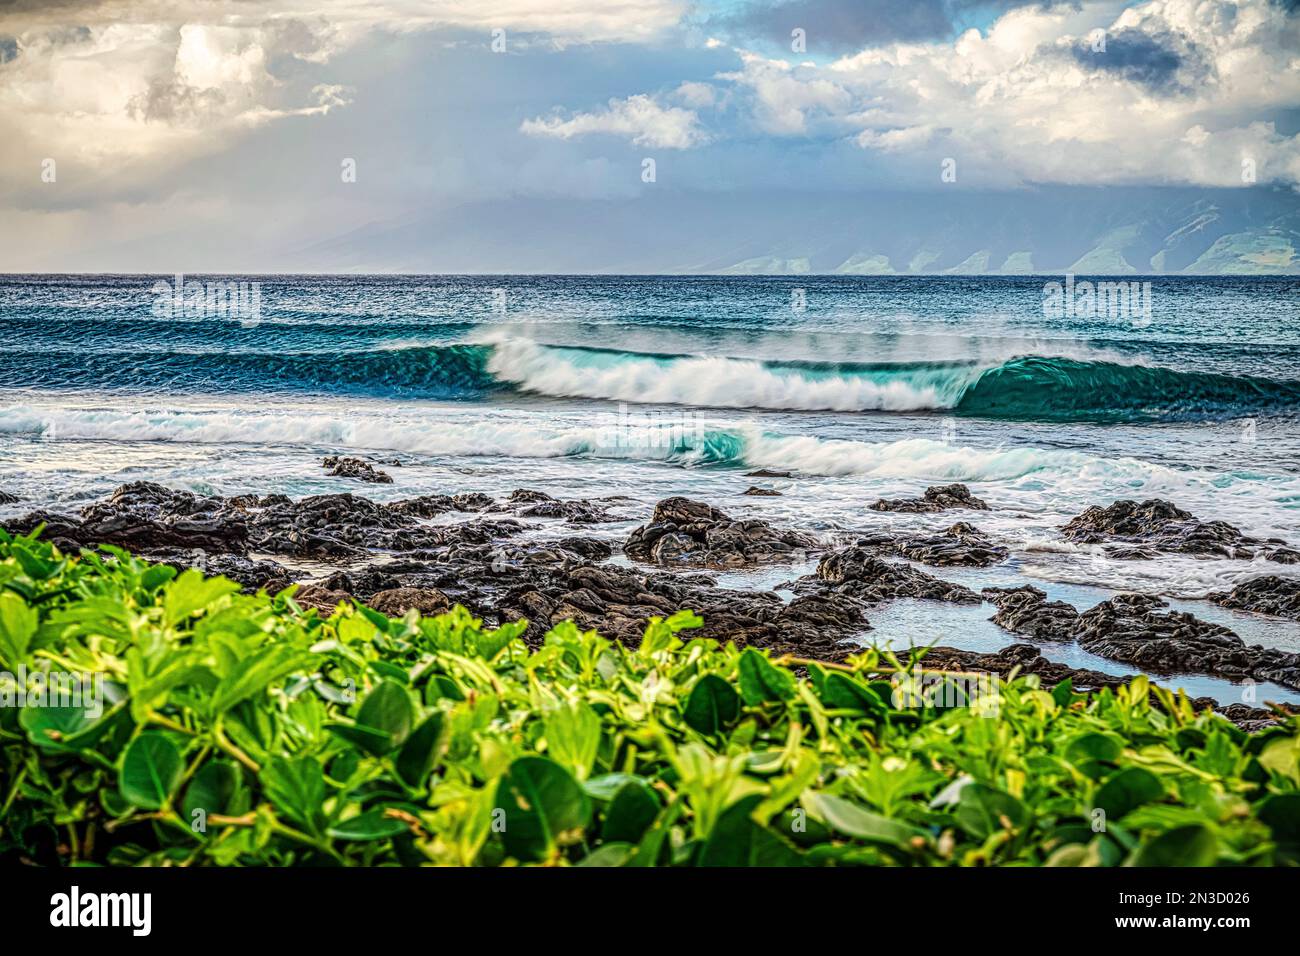 Waves roll into the beach of a hawaiian island with lava rock and plants; Maui, Hawaii, United States of America Stock Photo